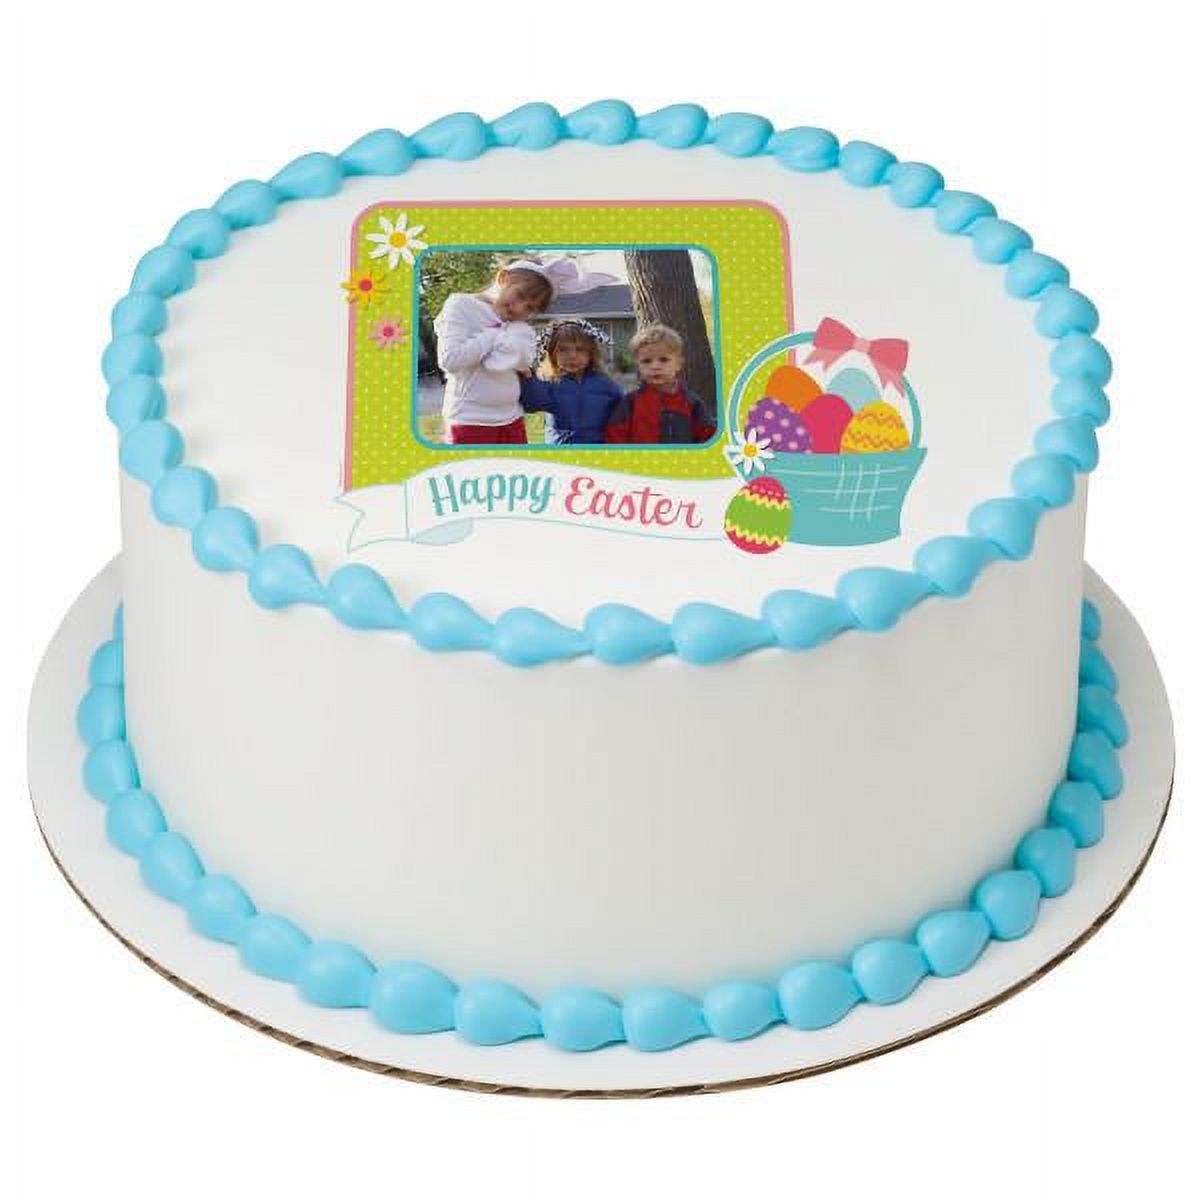 1/4 Sheet Animal Crossing Personalized Image Edible Frosting Cake Topper ABPID01079 - image 2 of 4